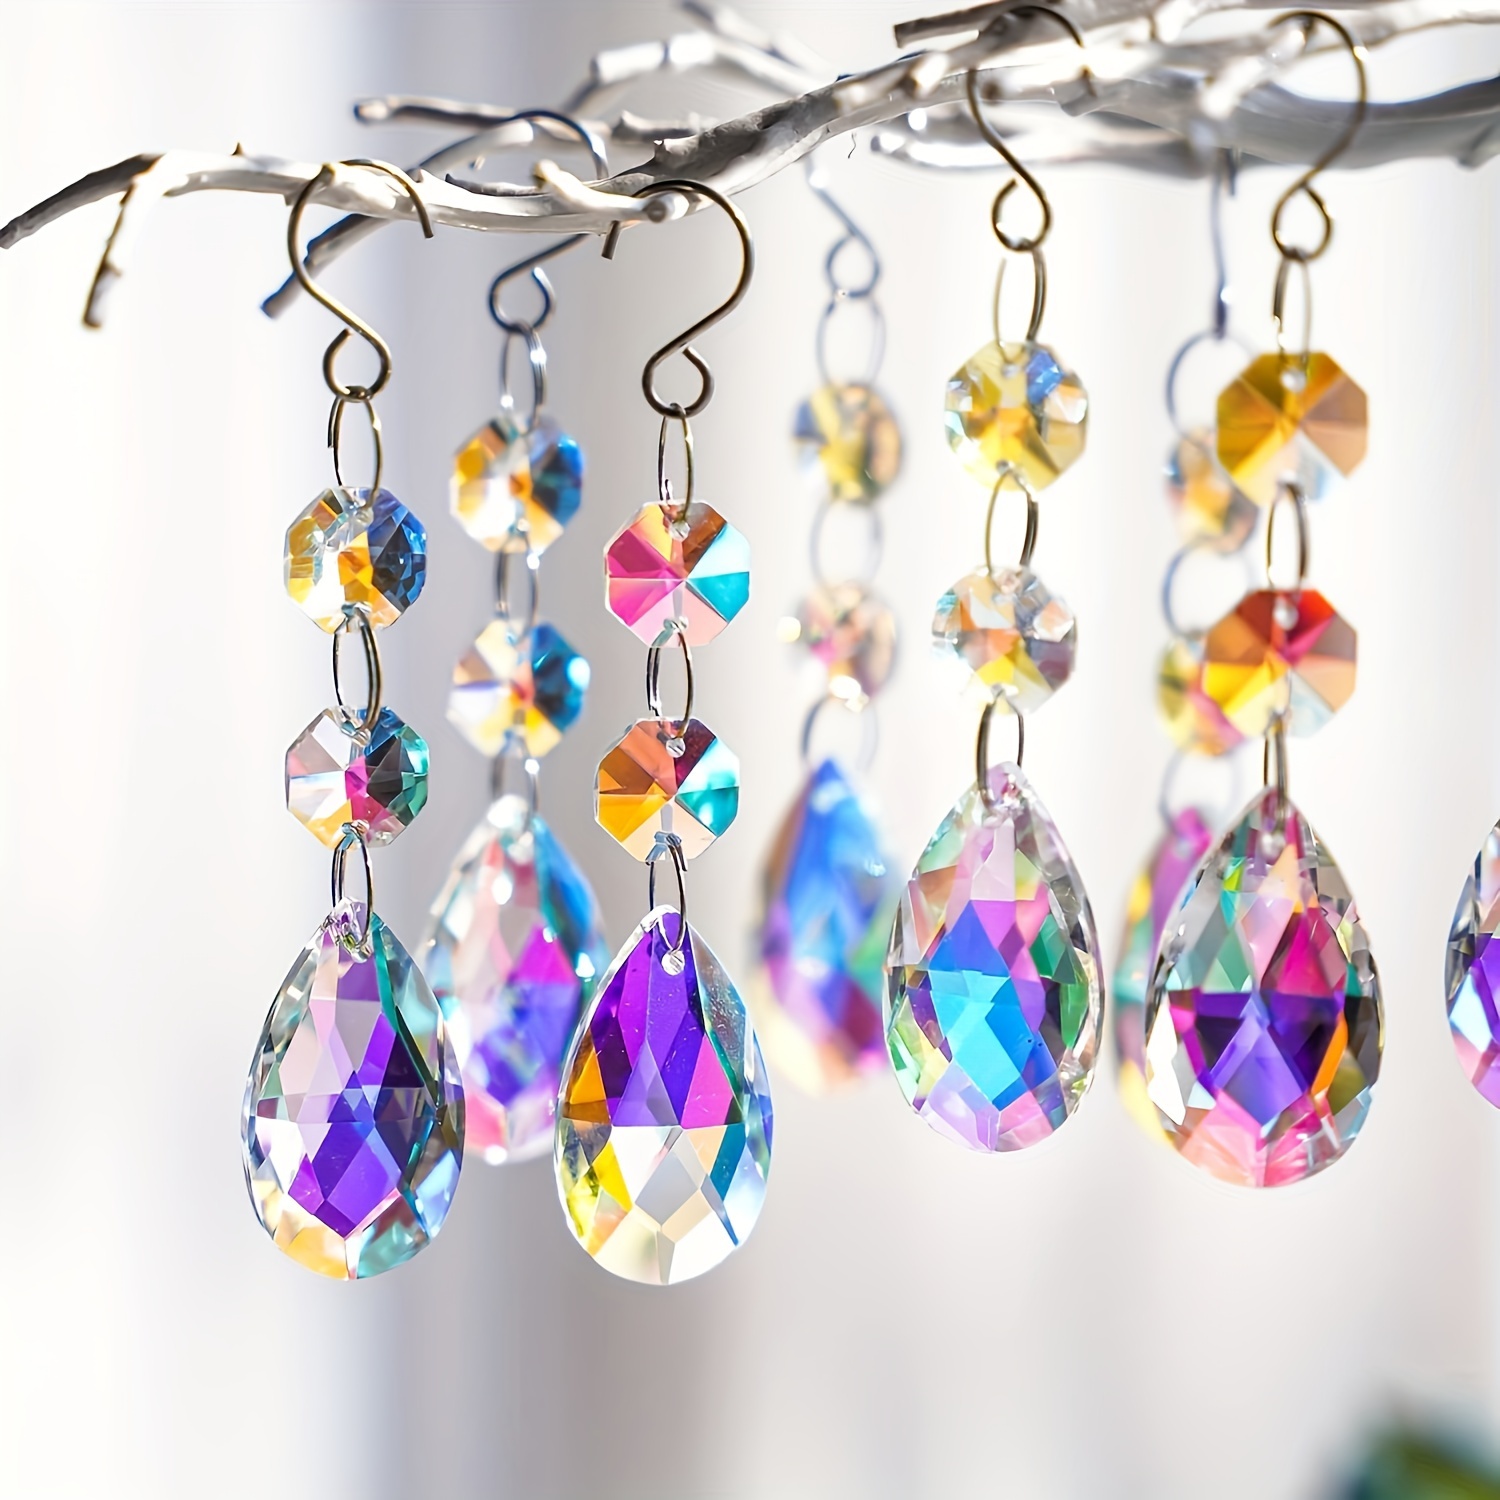 

5/10-piece Crystal Sun Catchers For Windows - Rainbow Maker Pendants, Perfect For Home Decor, Autumn Ambiance, And Gifts For Girls - Ideal For Weddings & Thanksgiving